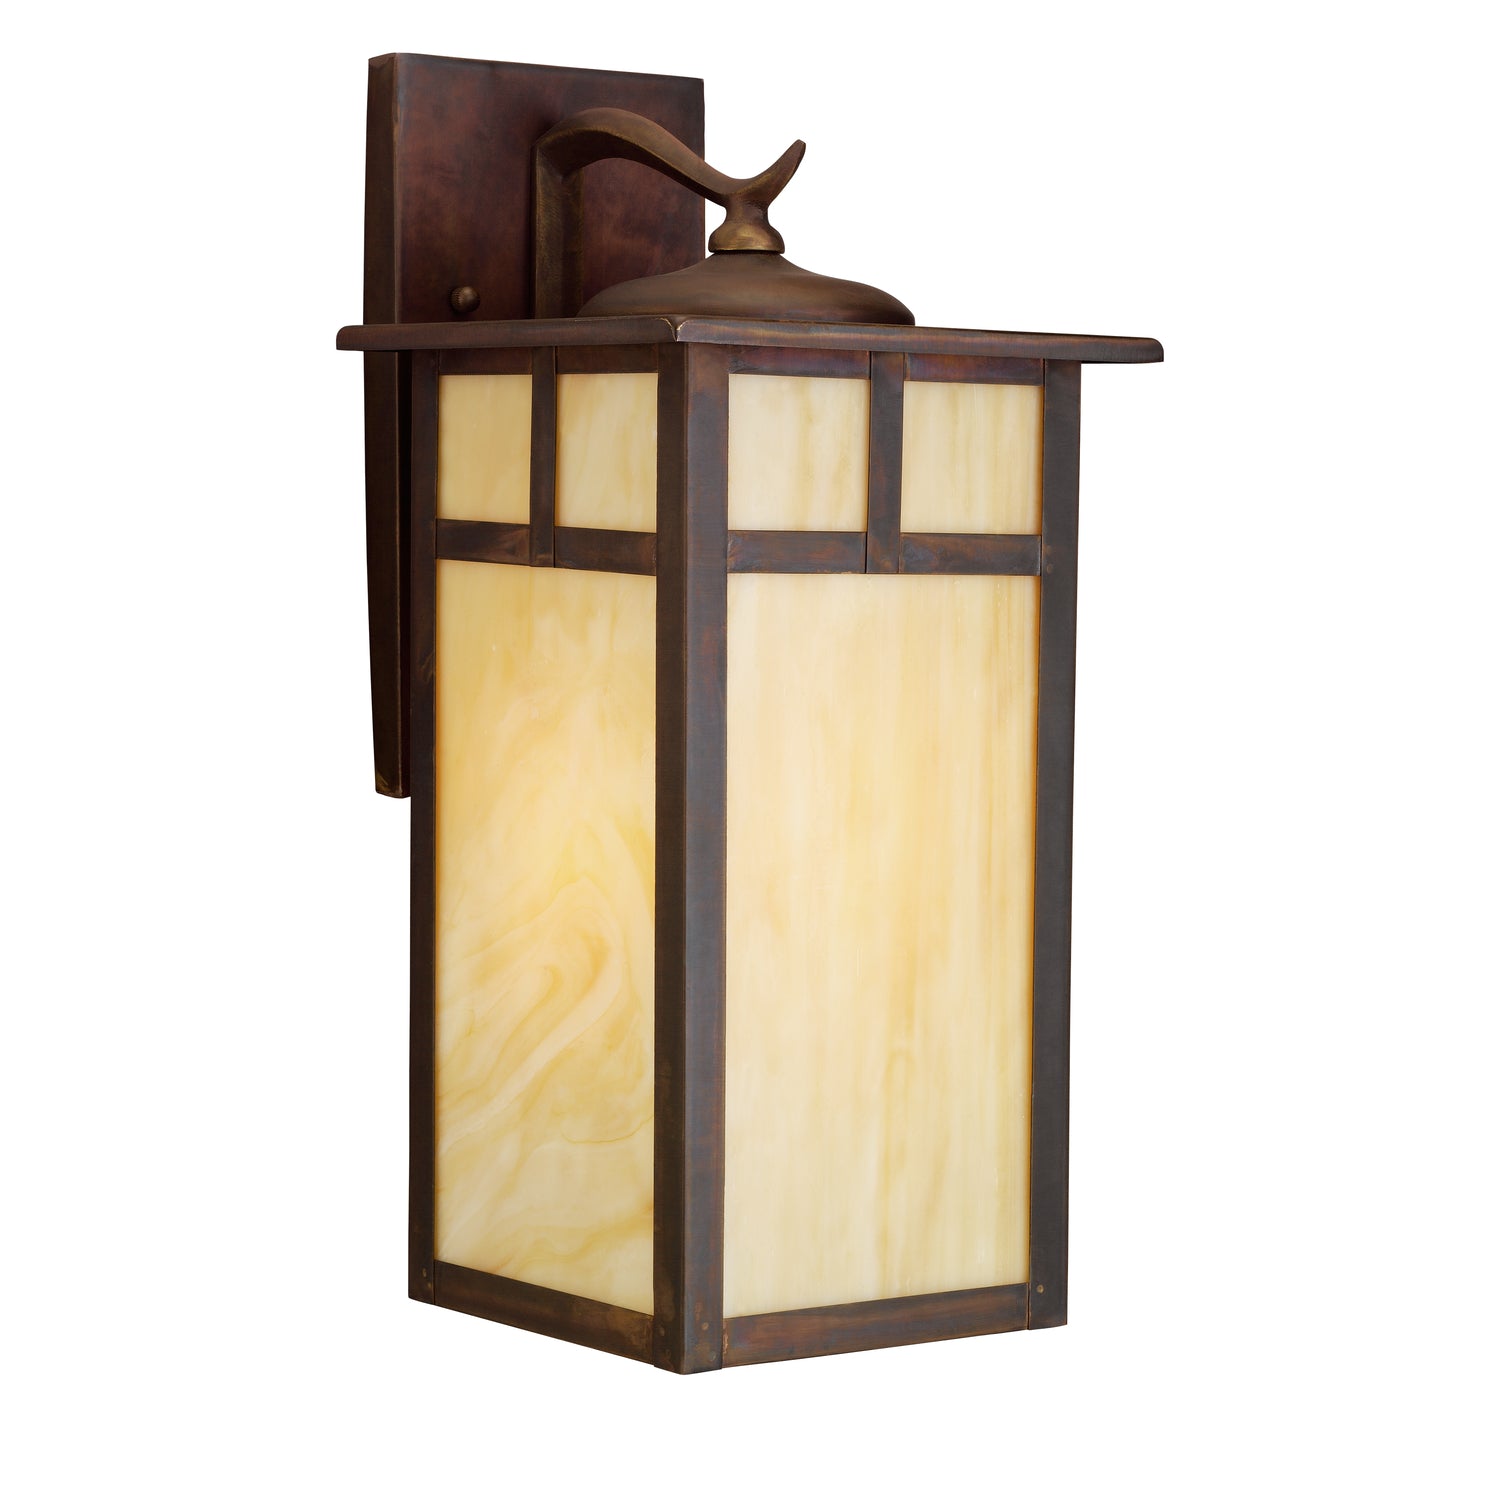 Alameda Outdoor Wall Light Canyon View